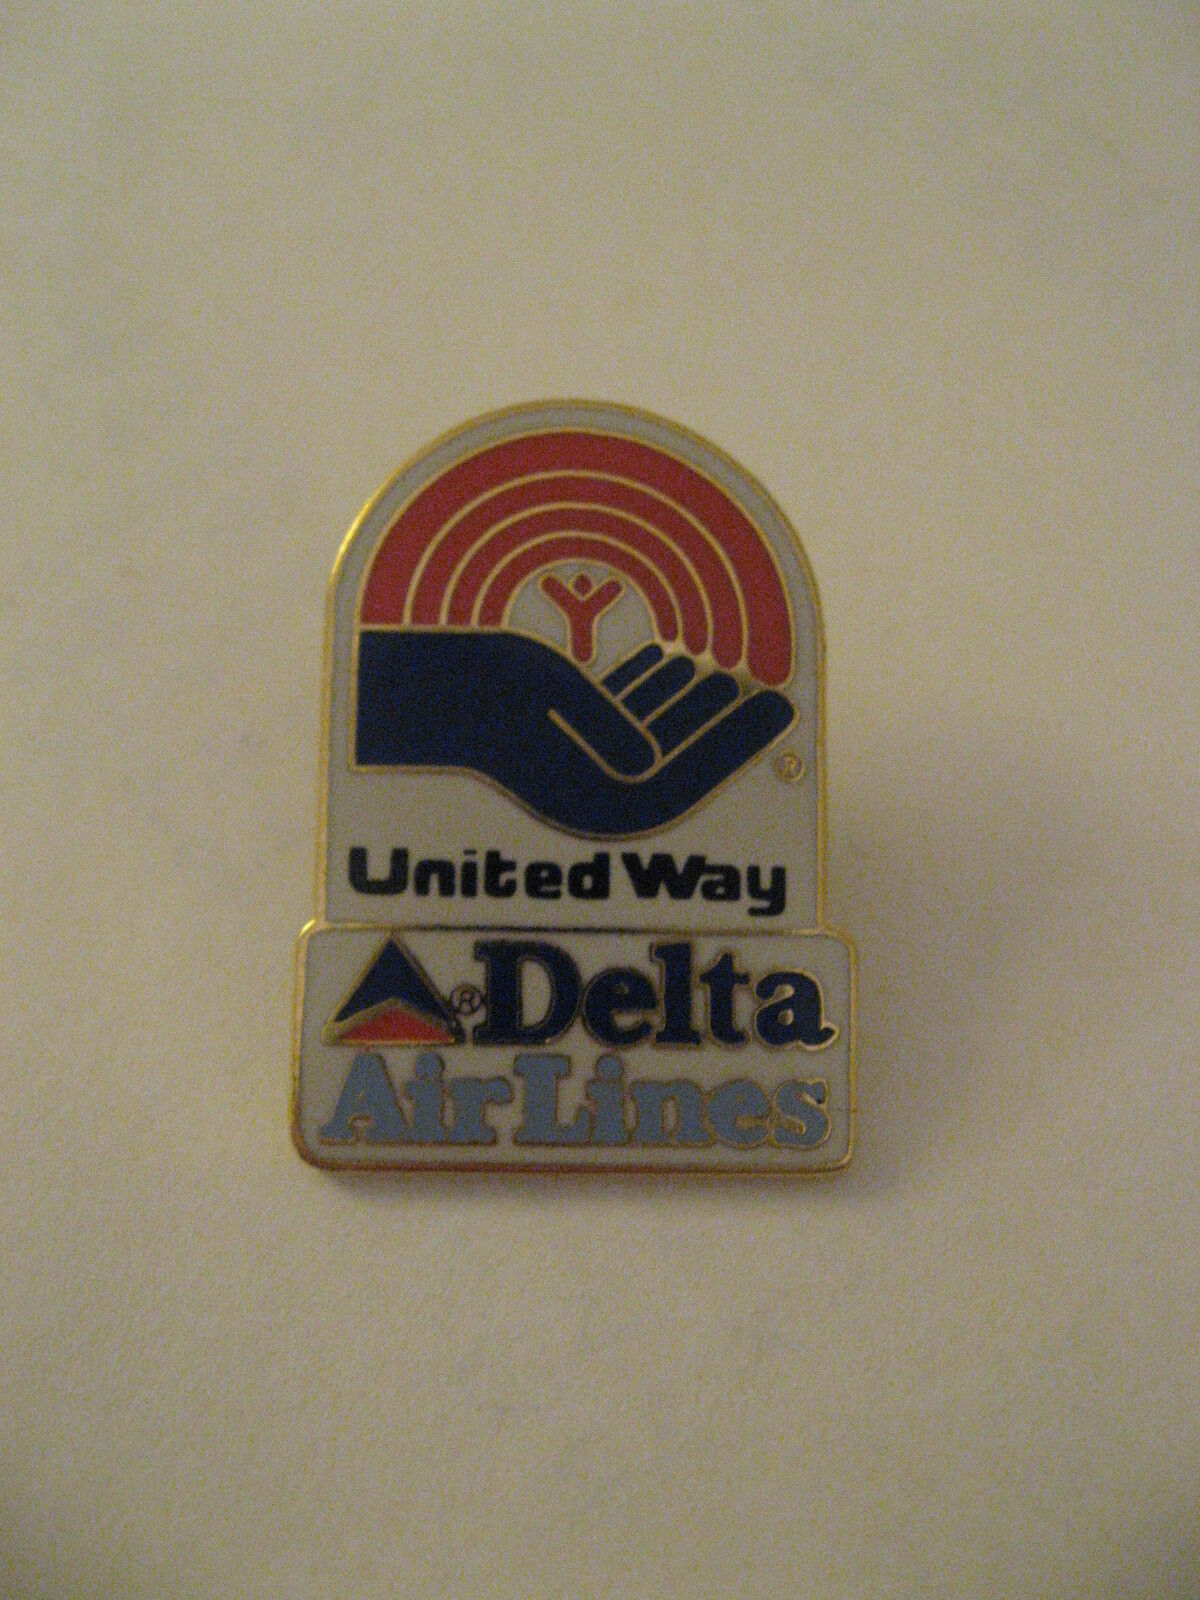 Delta Airlines Pin - DL 1999 Vintage United Way Employee Worker Lapel Hat Pin